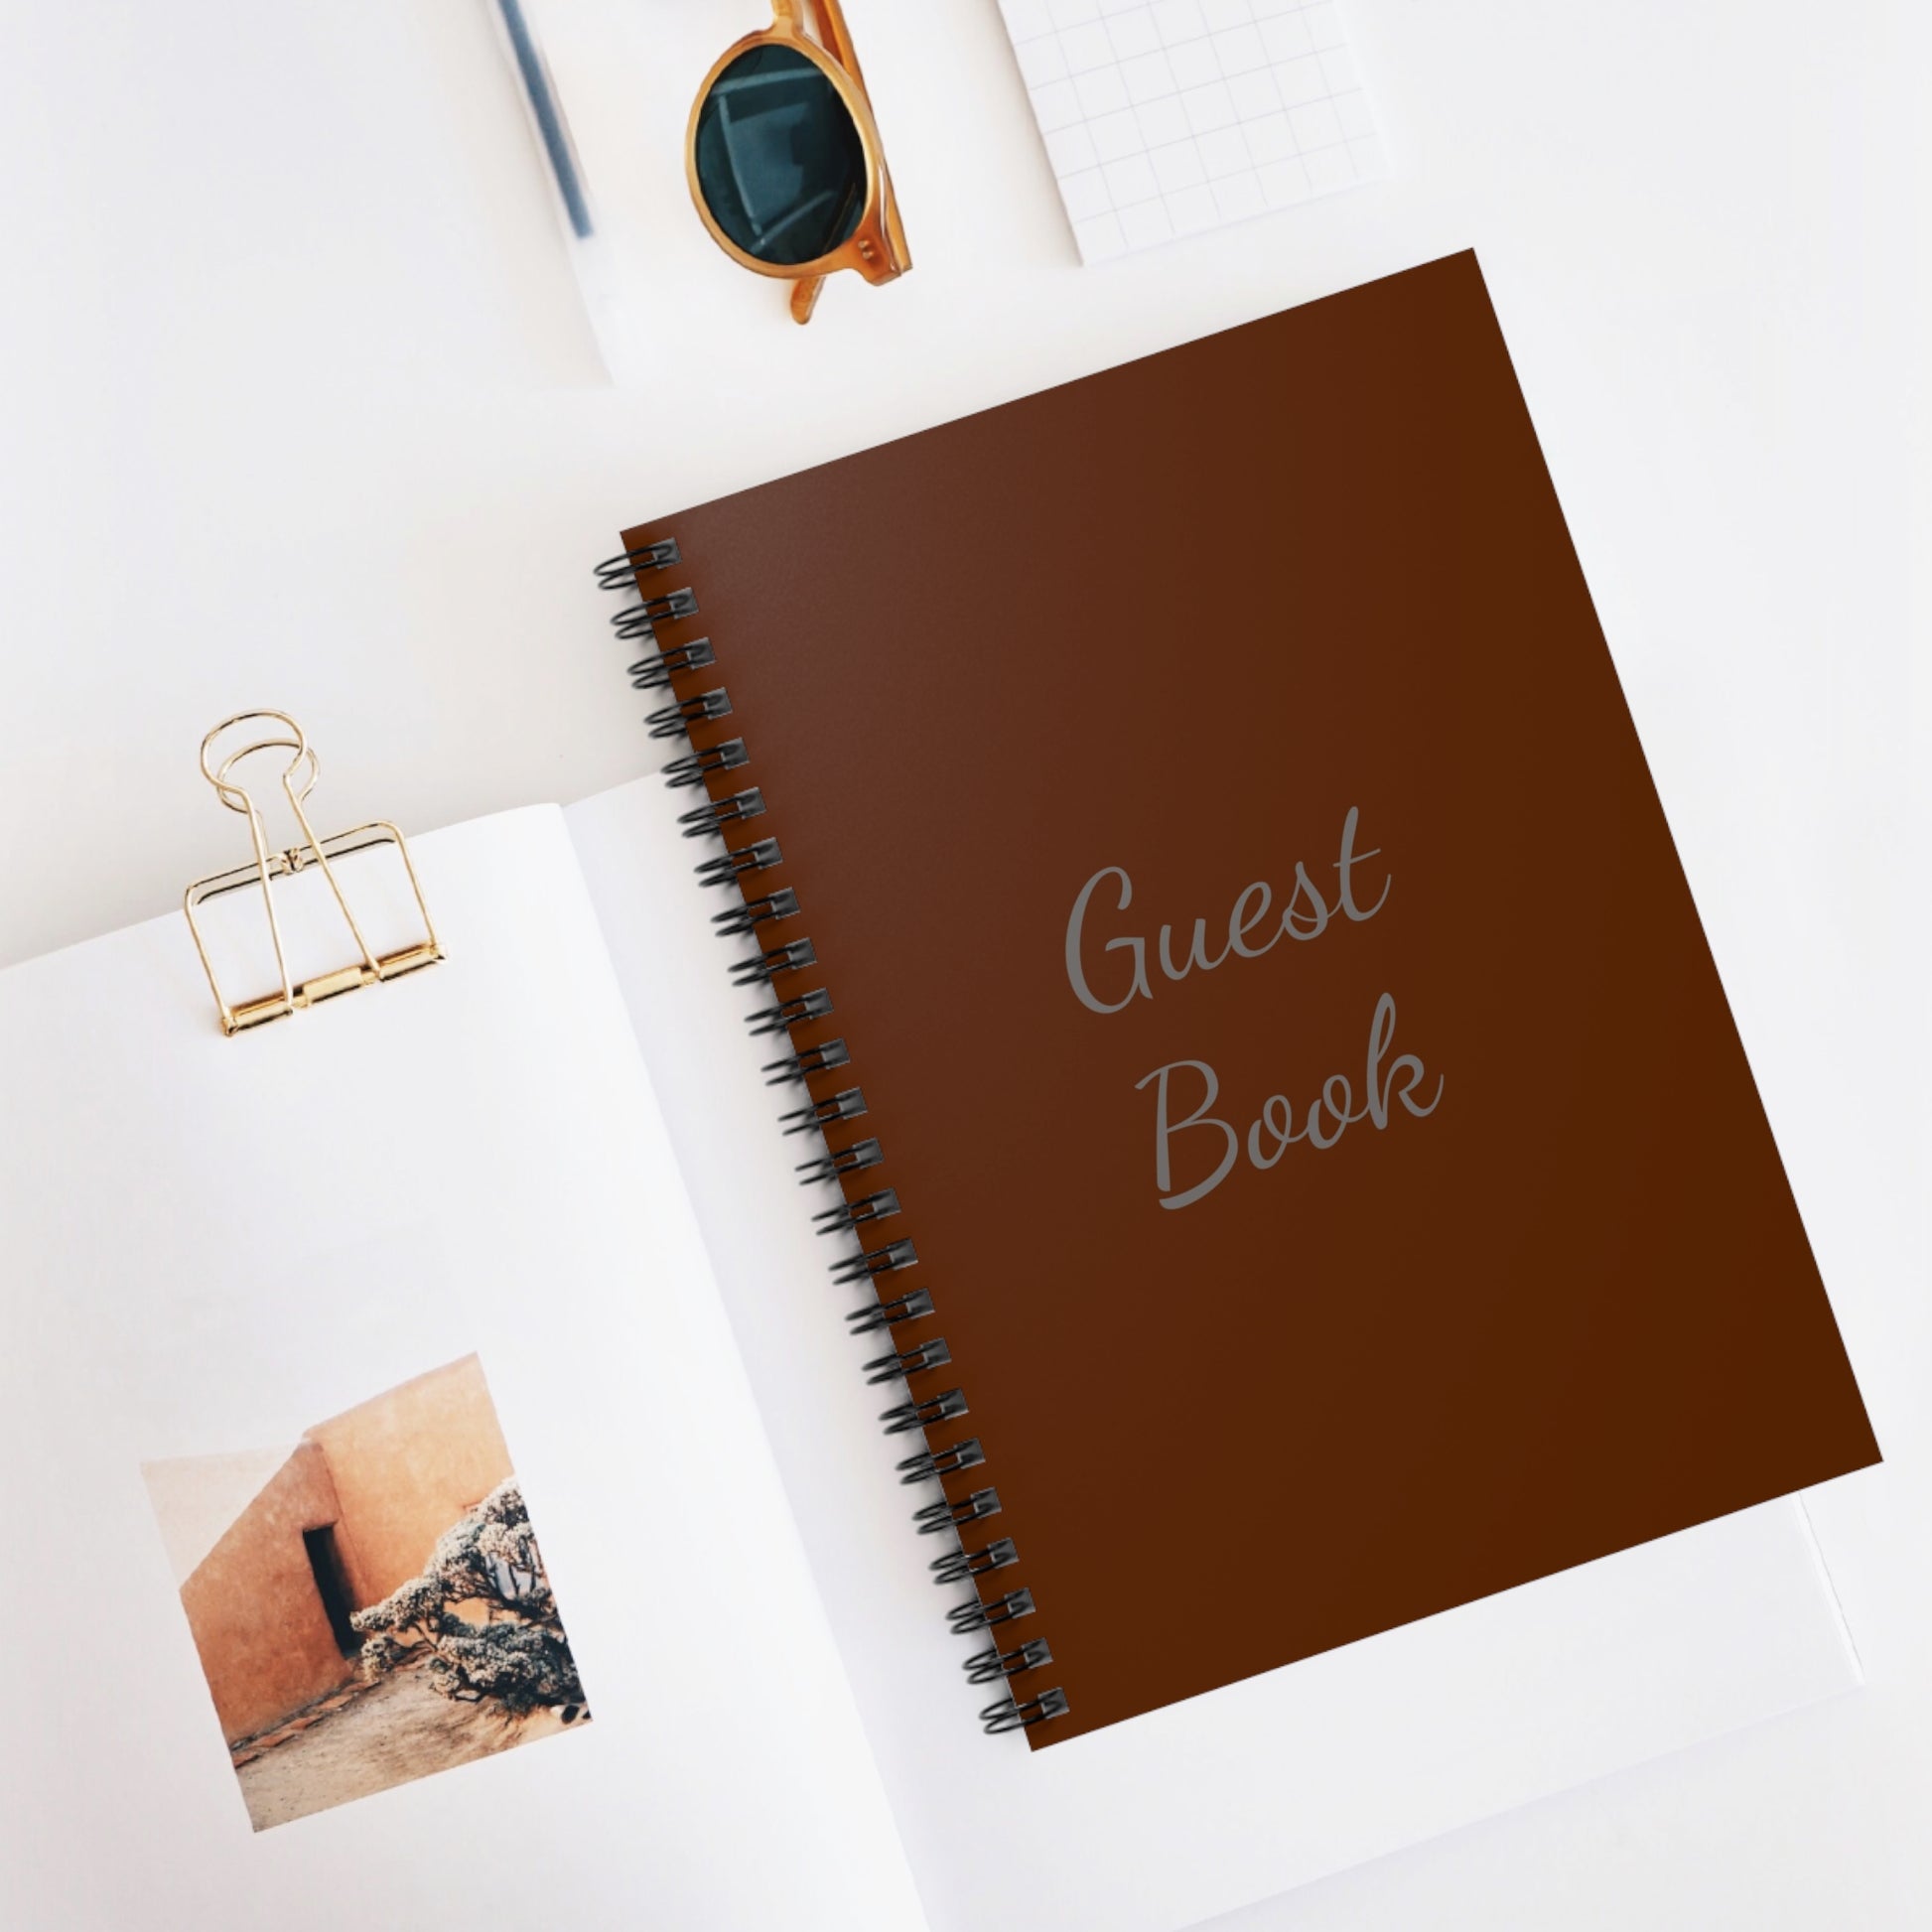 A Printify unisex spiral-bound guest book: 6" x 8"; 118 ruled lines for wedding receptions, placed on a white surface surrounded by office supplies and a photo.